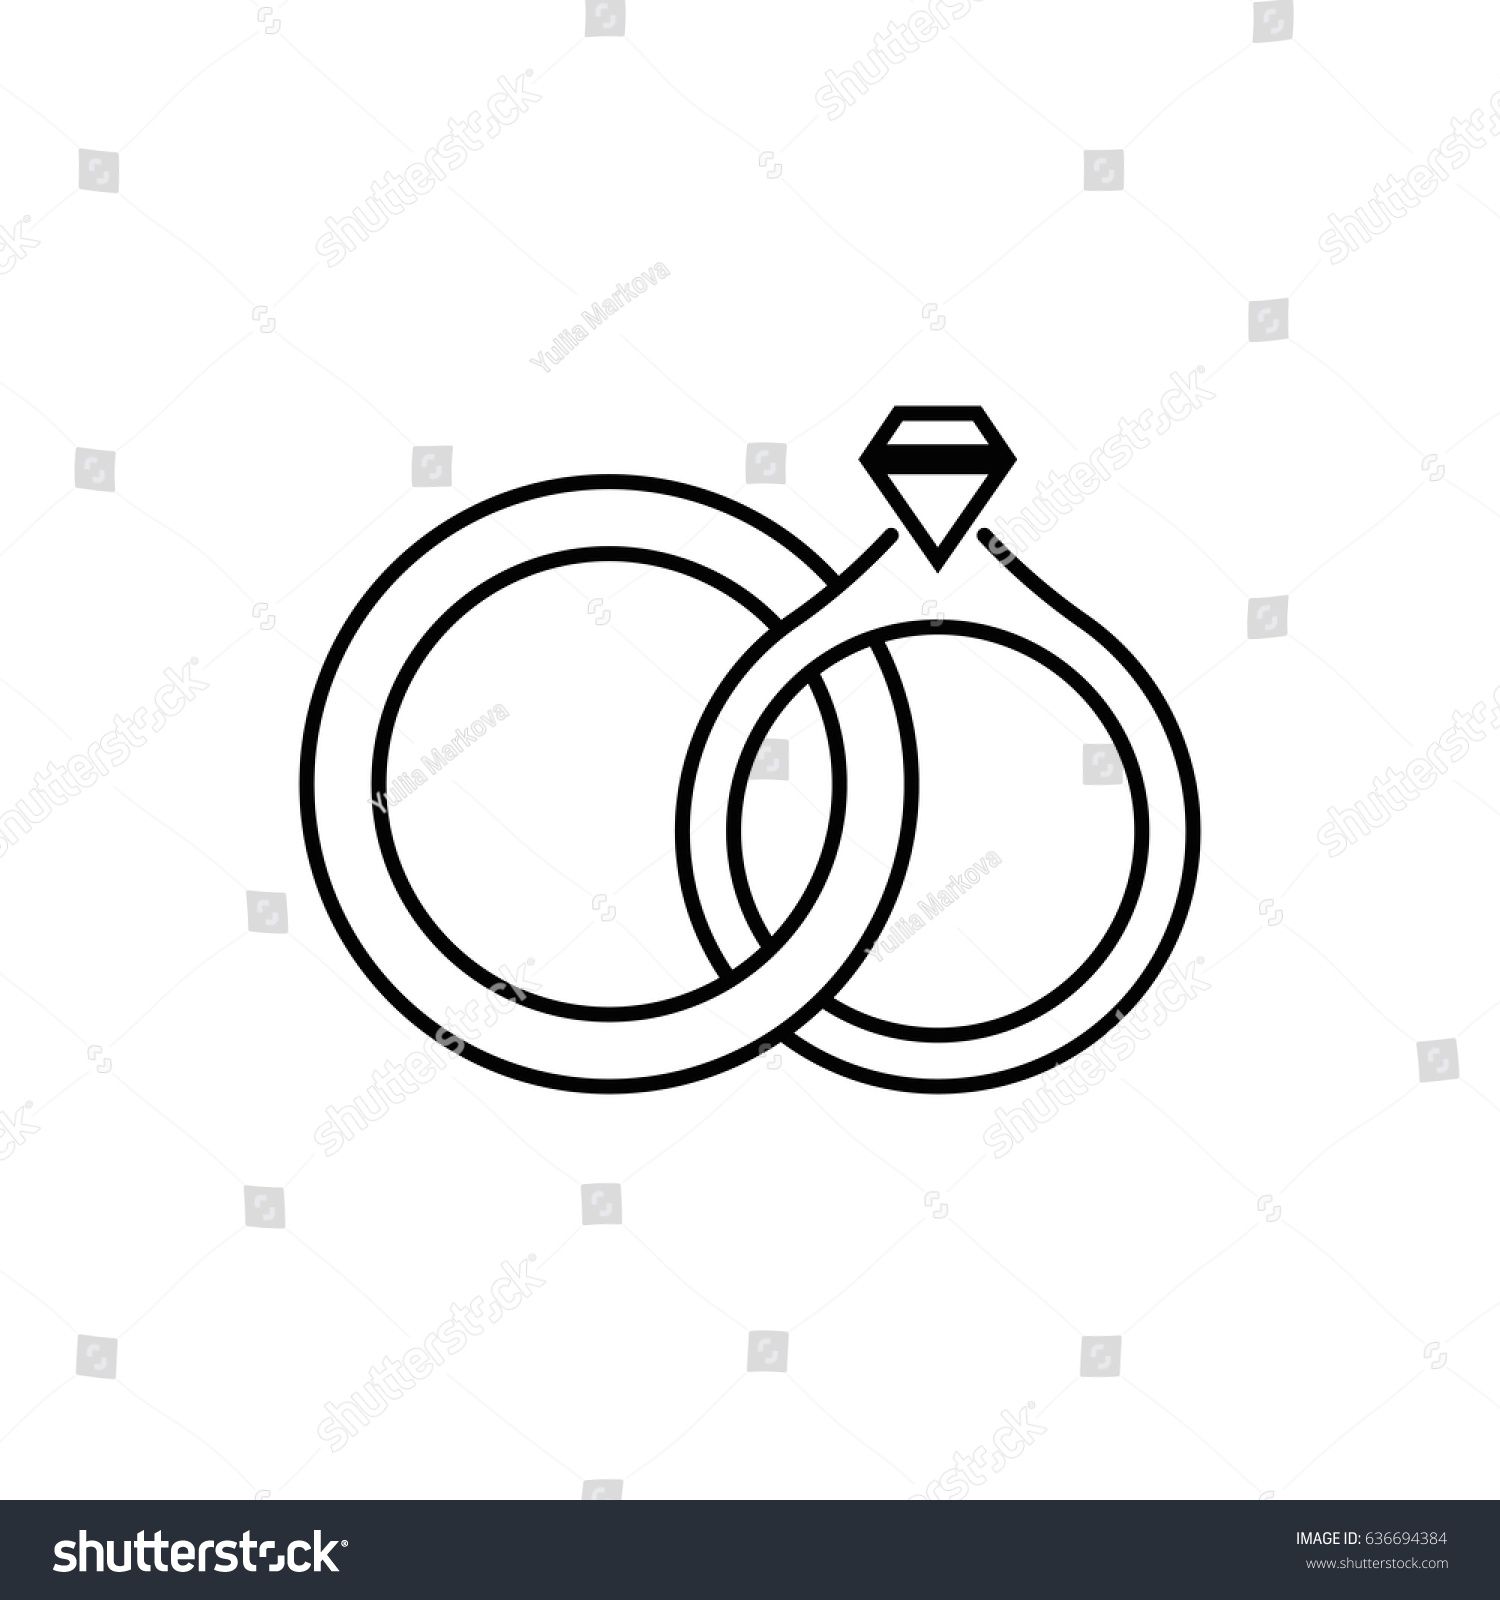 Two Linked Wedding Rings Illustration Flat Stock Vector 636694384 ...